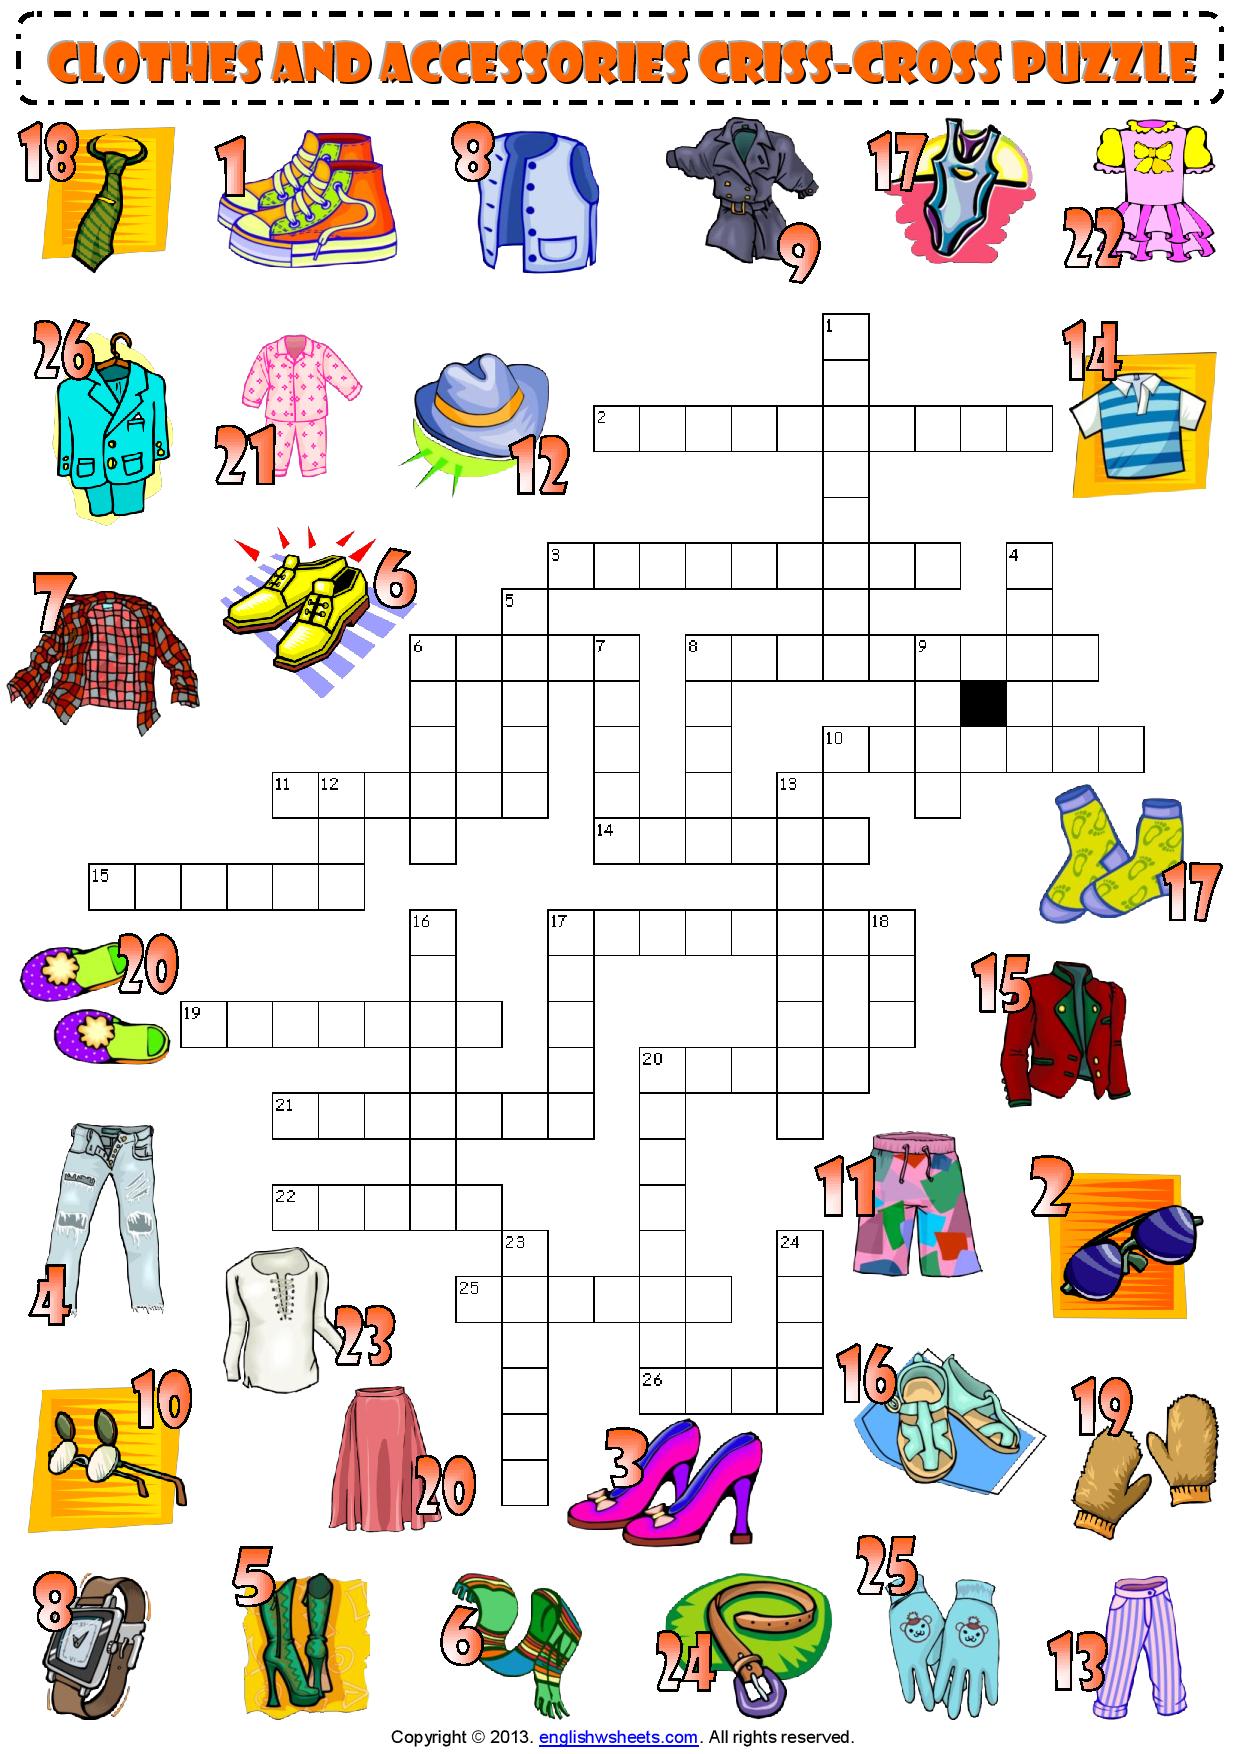 clothes and accessories criss cross crossword puzzle vocabulary worksheet  1-page-001 - Take the penTake the pen